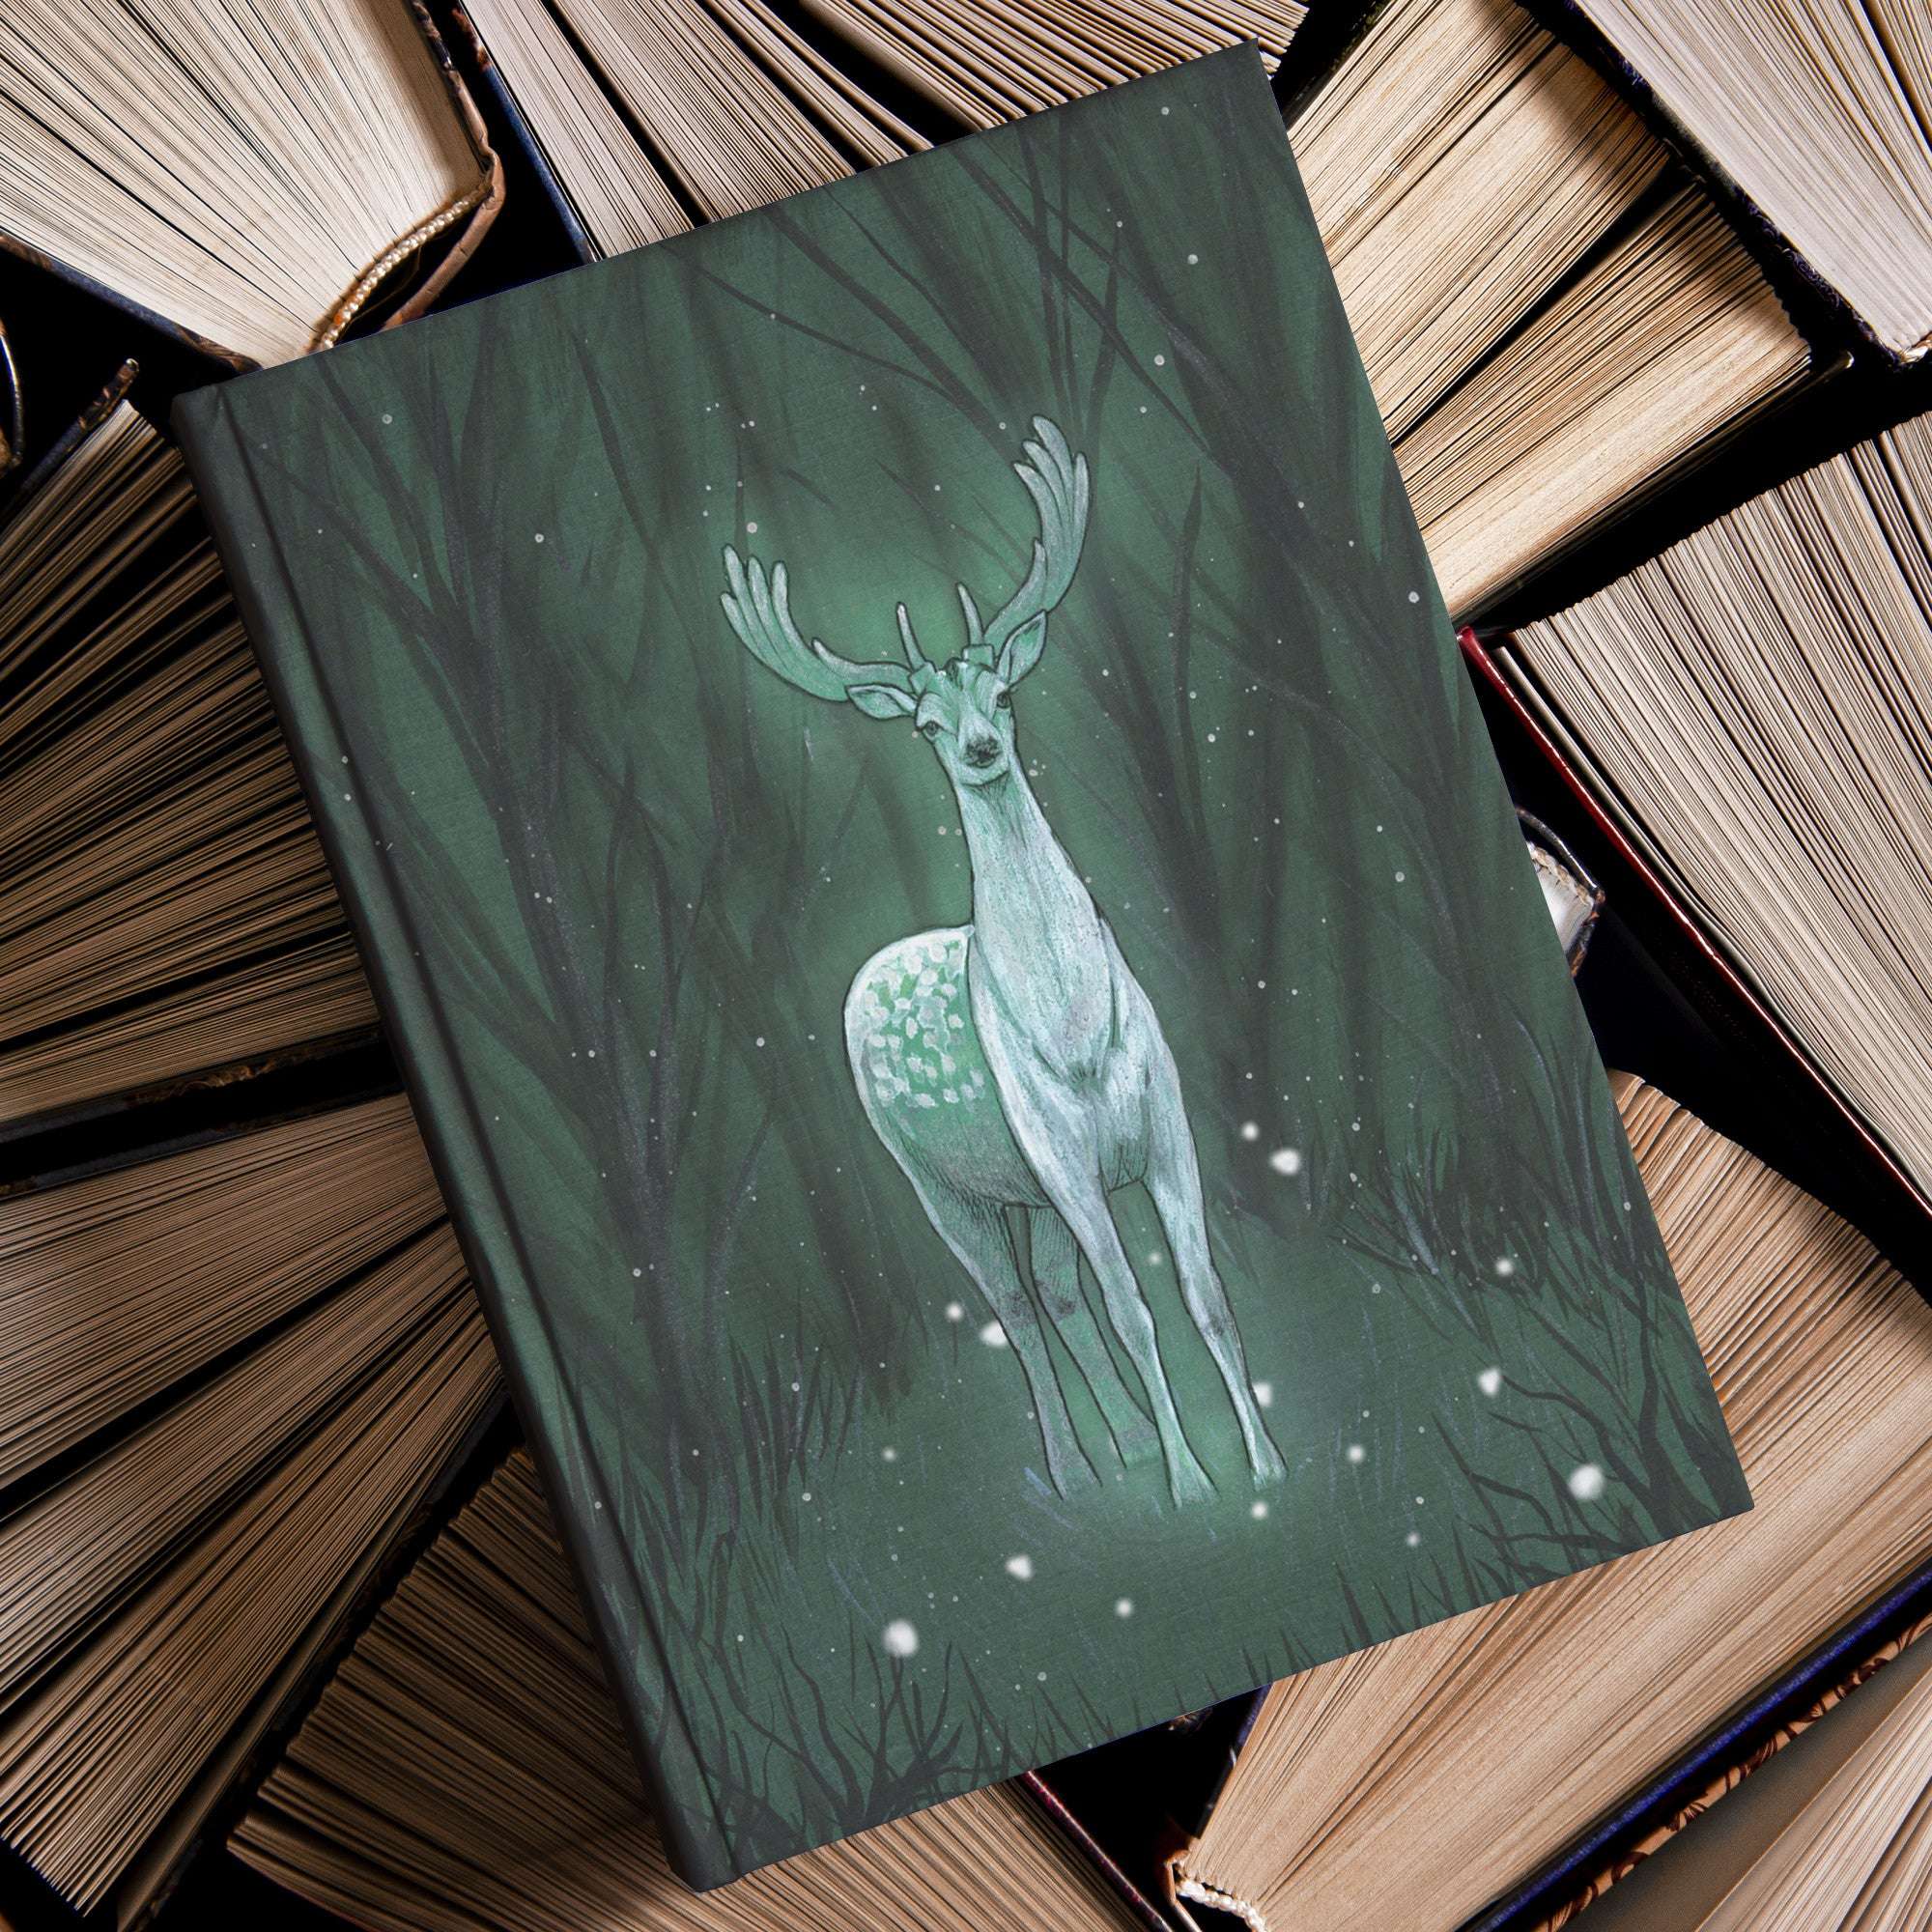 A Enchanted Deer Journal with an illustration of a mystical deer spirit in the forest lies on top of a pile of aged, hardcover books.